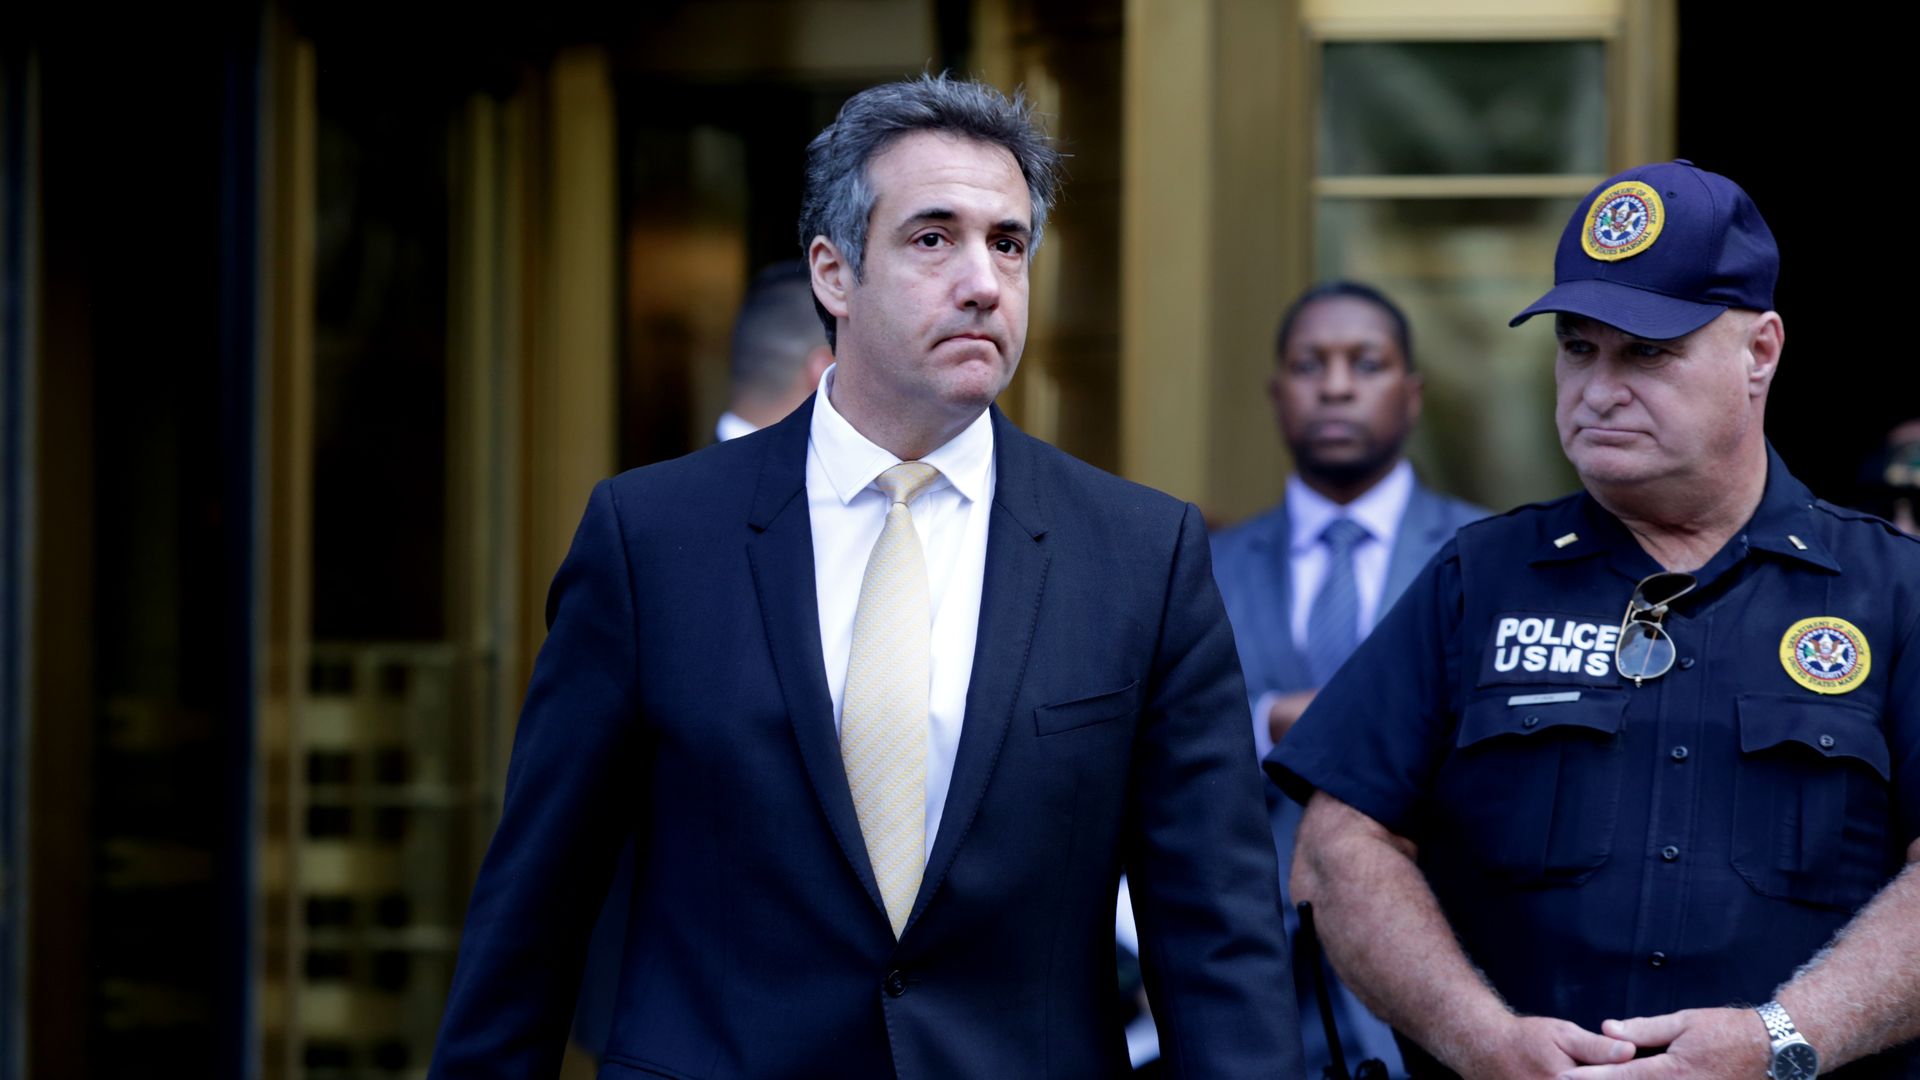 Michael Cohen, former lawyer to President Donald Trump, exits the Federal Courthouse in New York City on Tuesday. Photo: Yana Paskova/Getty Images